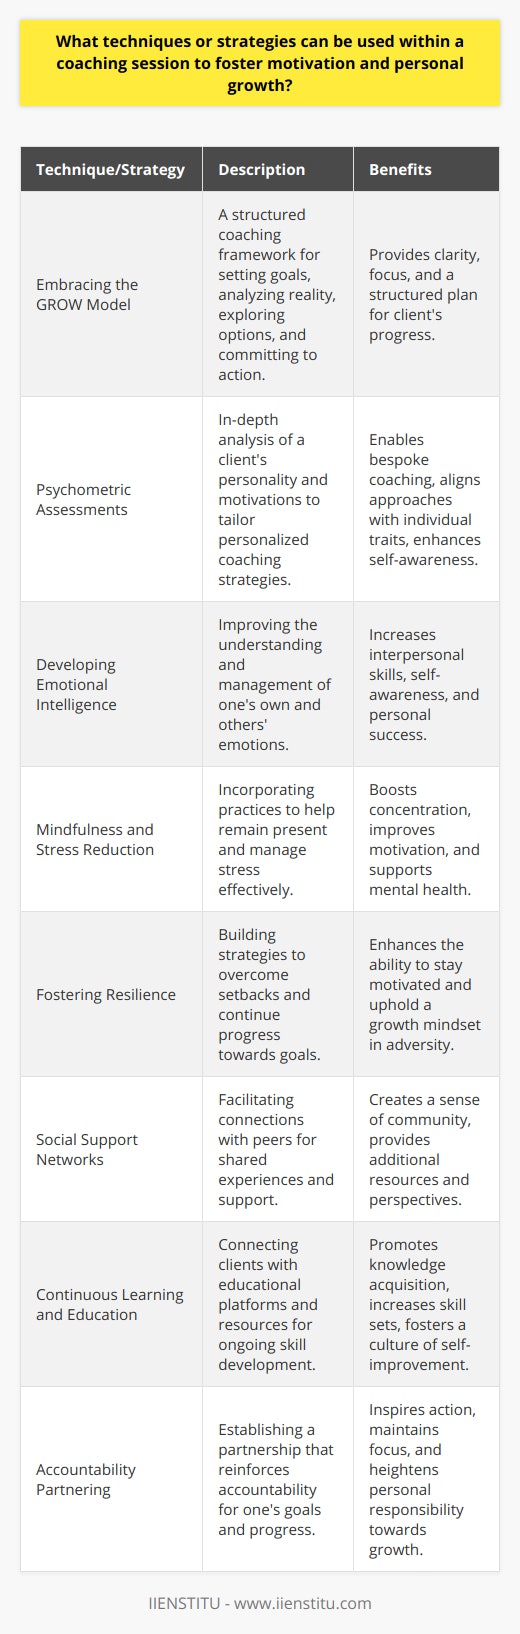 Coaching sessions are a unique incubator for fostering motivation and personal growth. By incorporating the right blend of techniques and strategies, coaches can unlock the potential within their clients and steer them towards achieving their full potential. Here are several methods that can be adopted within coaching sessions to catalyze this transformative process:Embracing the GROW ModelThe GROW (Goal, Reality, Options, Will) model is a well-structured coaching framework that supports goal setting and problem-solving. This model guides clients through a process of setting clear and attainable goals, analyzing the current situation (Reality), exploring possible paths (Options), and then committing to action (Will). This structure ensures that clients have a plan of attack and remain focused throughout their coaching journey.Psychometric AssessmentsThe use of psychometric assessments can provide in-depth insights into a client's personality, strengths, weaknesses, and motivations. This data can be instrumental in tailoring a coaching approach that is bespoke to the individual's character and needs, thereby fostering deeper motivation and more strategic personal growth.Developing Emotional IntelligenceCoaching can focus on enhancing emotional intelligence (EI), which is crucial for personal success in various realms of life. Coaches can use techniques to help clients understand and manage their own emotions, as well as the emotions of others, leading to improved interpersonal relations and self-awareness, both key components of motivation and growth.Mindfulness and Stress ReductionMindfulness practices can be incorporated into coaching sessions to help clients remain present and reduce stress. As individuals learn to cope with stress effectively, their motivation and concentration improve, supporting their personal development journey.Fostering ResilienceCoaches can instill resilience-building strategies, helping clients to bounce back from setbacks and persist in their pursuit of goals. Resilient individuals are more likely to stay motivated and maintain a growth mindset in the face of adversity, which can be crucial for lasting development.Social Support NetworksThe establishment of social support networks can be encouraged during coaching sessions. By connecting clients with peers who have similar aspirations or who have successfully navigated similar challenges, a sense of community is fostered. This camaraderie can boost motivation and provide additional resources and perspectives for personal growth.Continuous Learning and EducationOne of the avenues through which personal growth can be nourished is through continuous learning and education. Resources like those provided by IIENSTITU offer a myriad of educational opportunities designed to enhance knowledge and skills across various fields. A coach might facilitate connections to these learning platforms to support a client's development plan.Accountability PartneringFinally, establishing an accountability partnership, either with the coach or a peer, can significantly bolster motivation. When clients know they must report on their progress, they are more inspired to take action and stay on track with their personal growth objectives.Each of these approaches provides distinct benefits and, when combined, can result in a holistic coaching experience that promotes sustained motivation and personal growth. Coaches who proficiently incorporate these techniques into their practices can greatly amplify the effectiveness of their sessions and contribute meaningful impacts within their clients' lives.